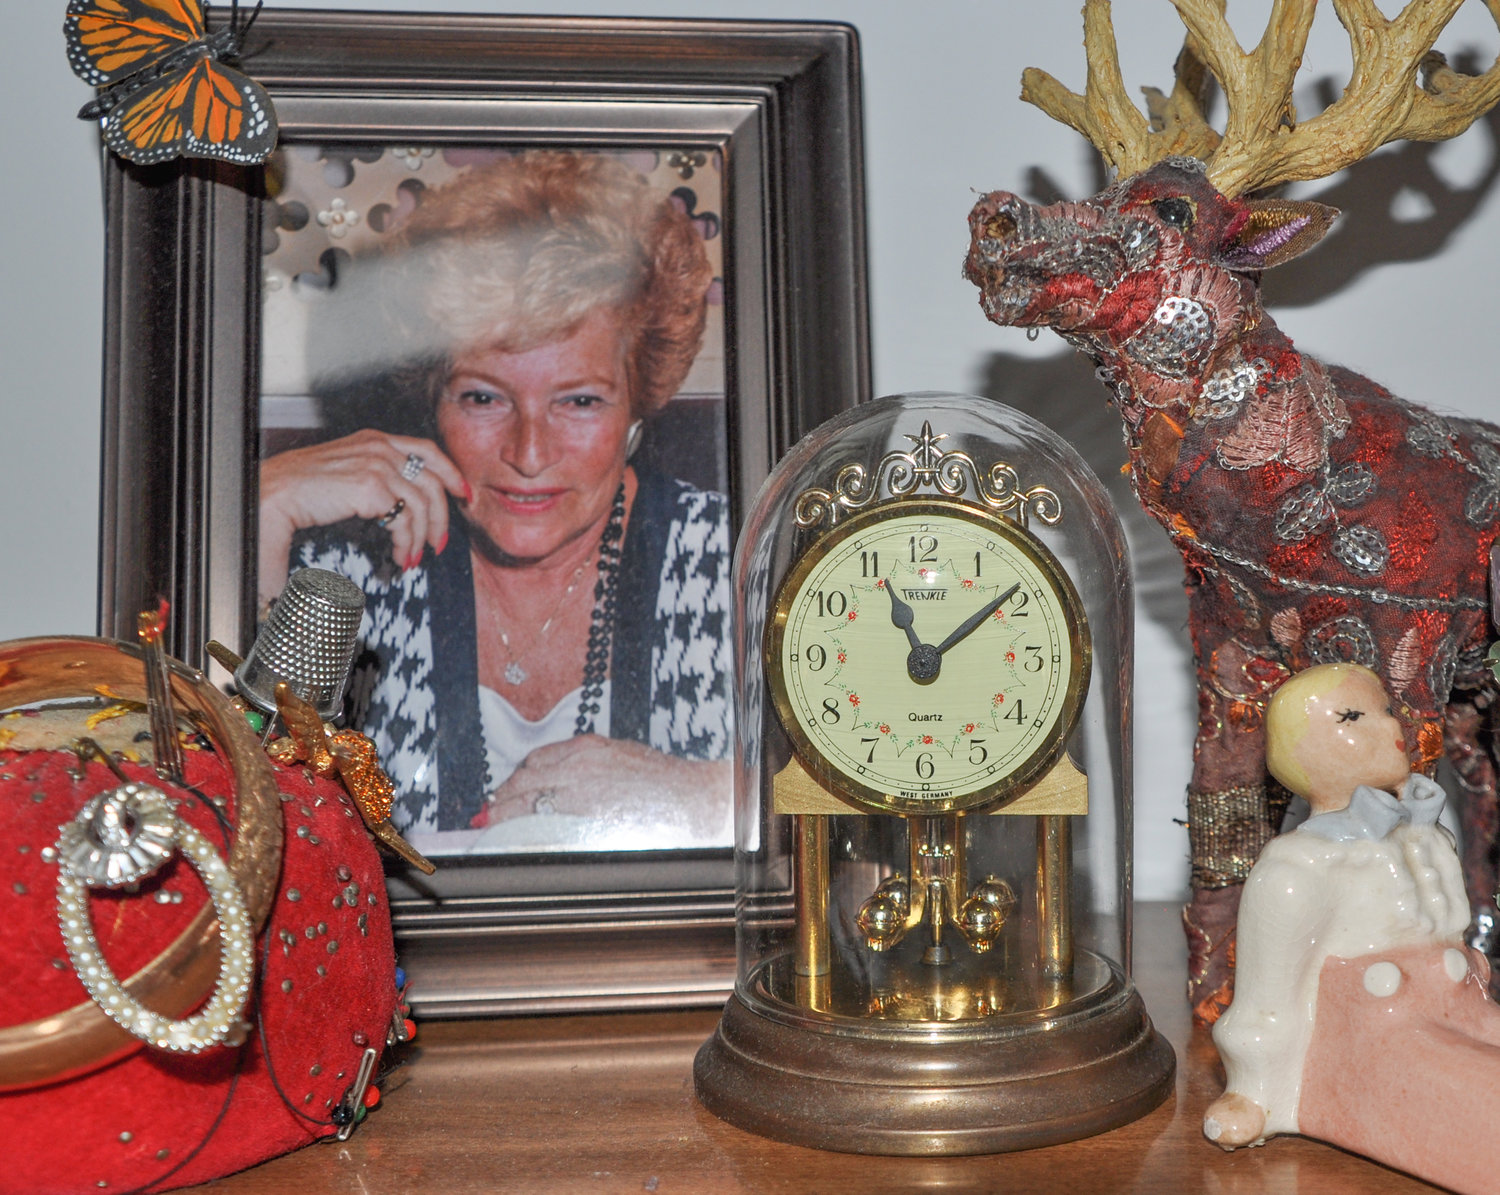 I inherited Mom's "anniversary clock" (yes, that's Barbara Fox just behind it)  which keeps time with a mechanism called a torsion pendulum and sits on my dresser in the bedroom. She loved this little clock and now I do too. Thanks, Mom.